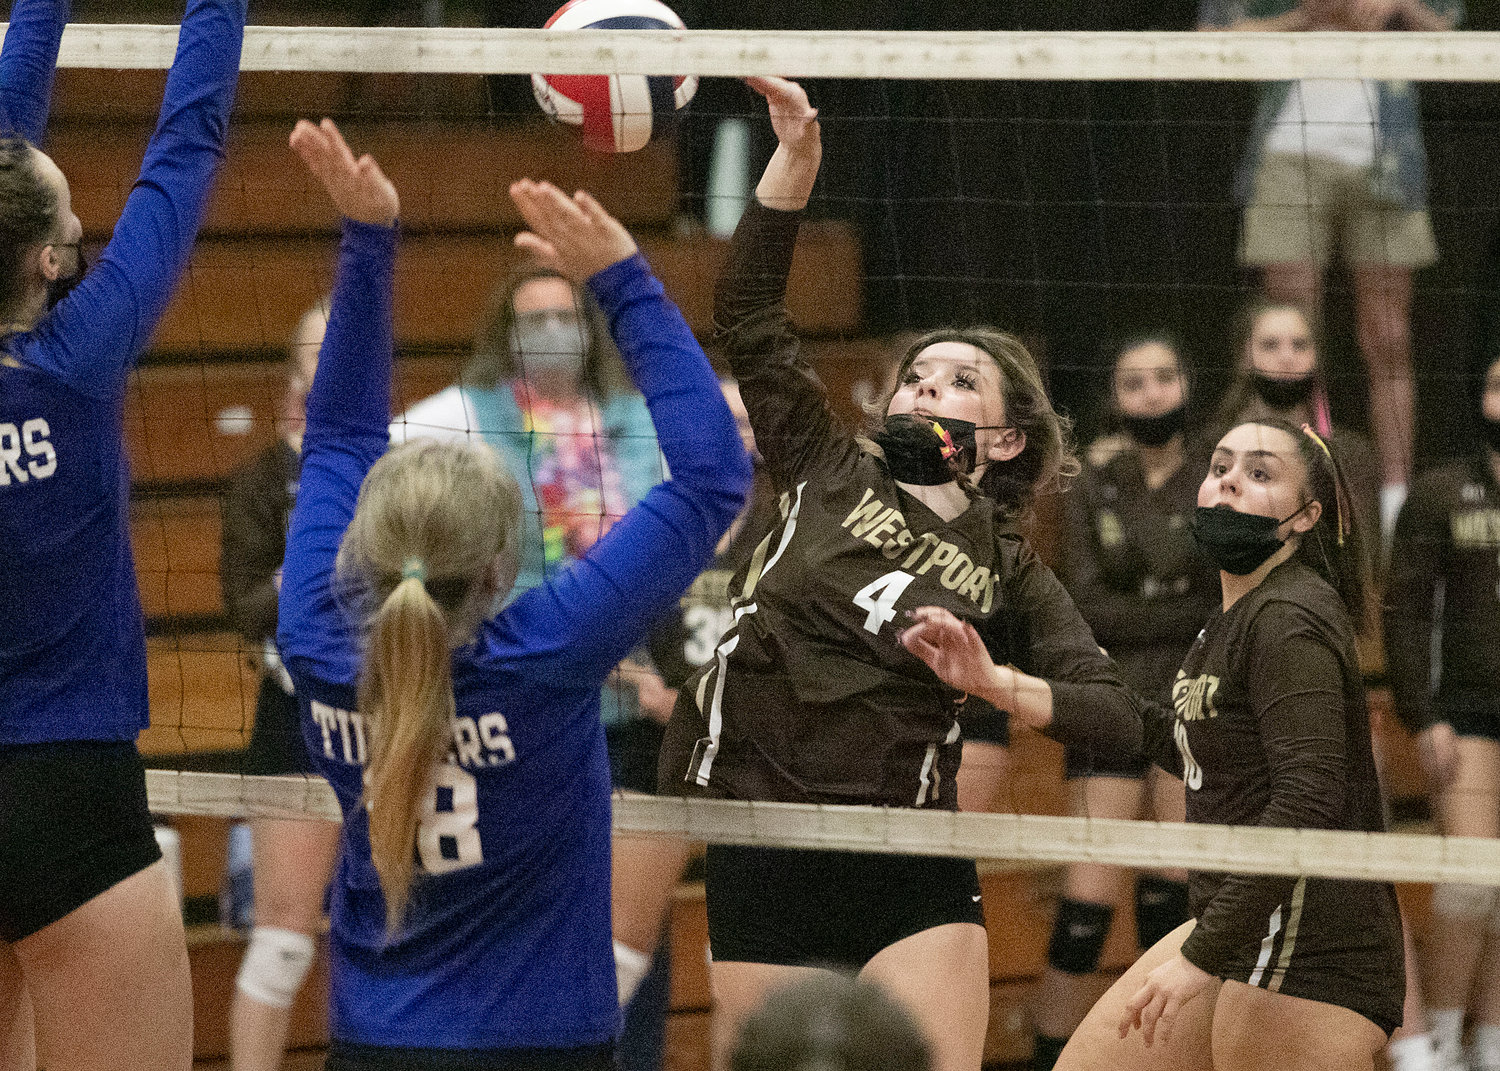 Middle hitter Zoey Sylvain taps the ball over the net with Abby Gaudreau looking on at right.